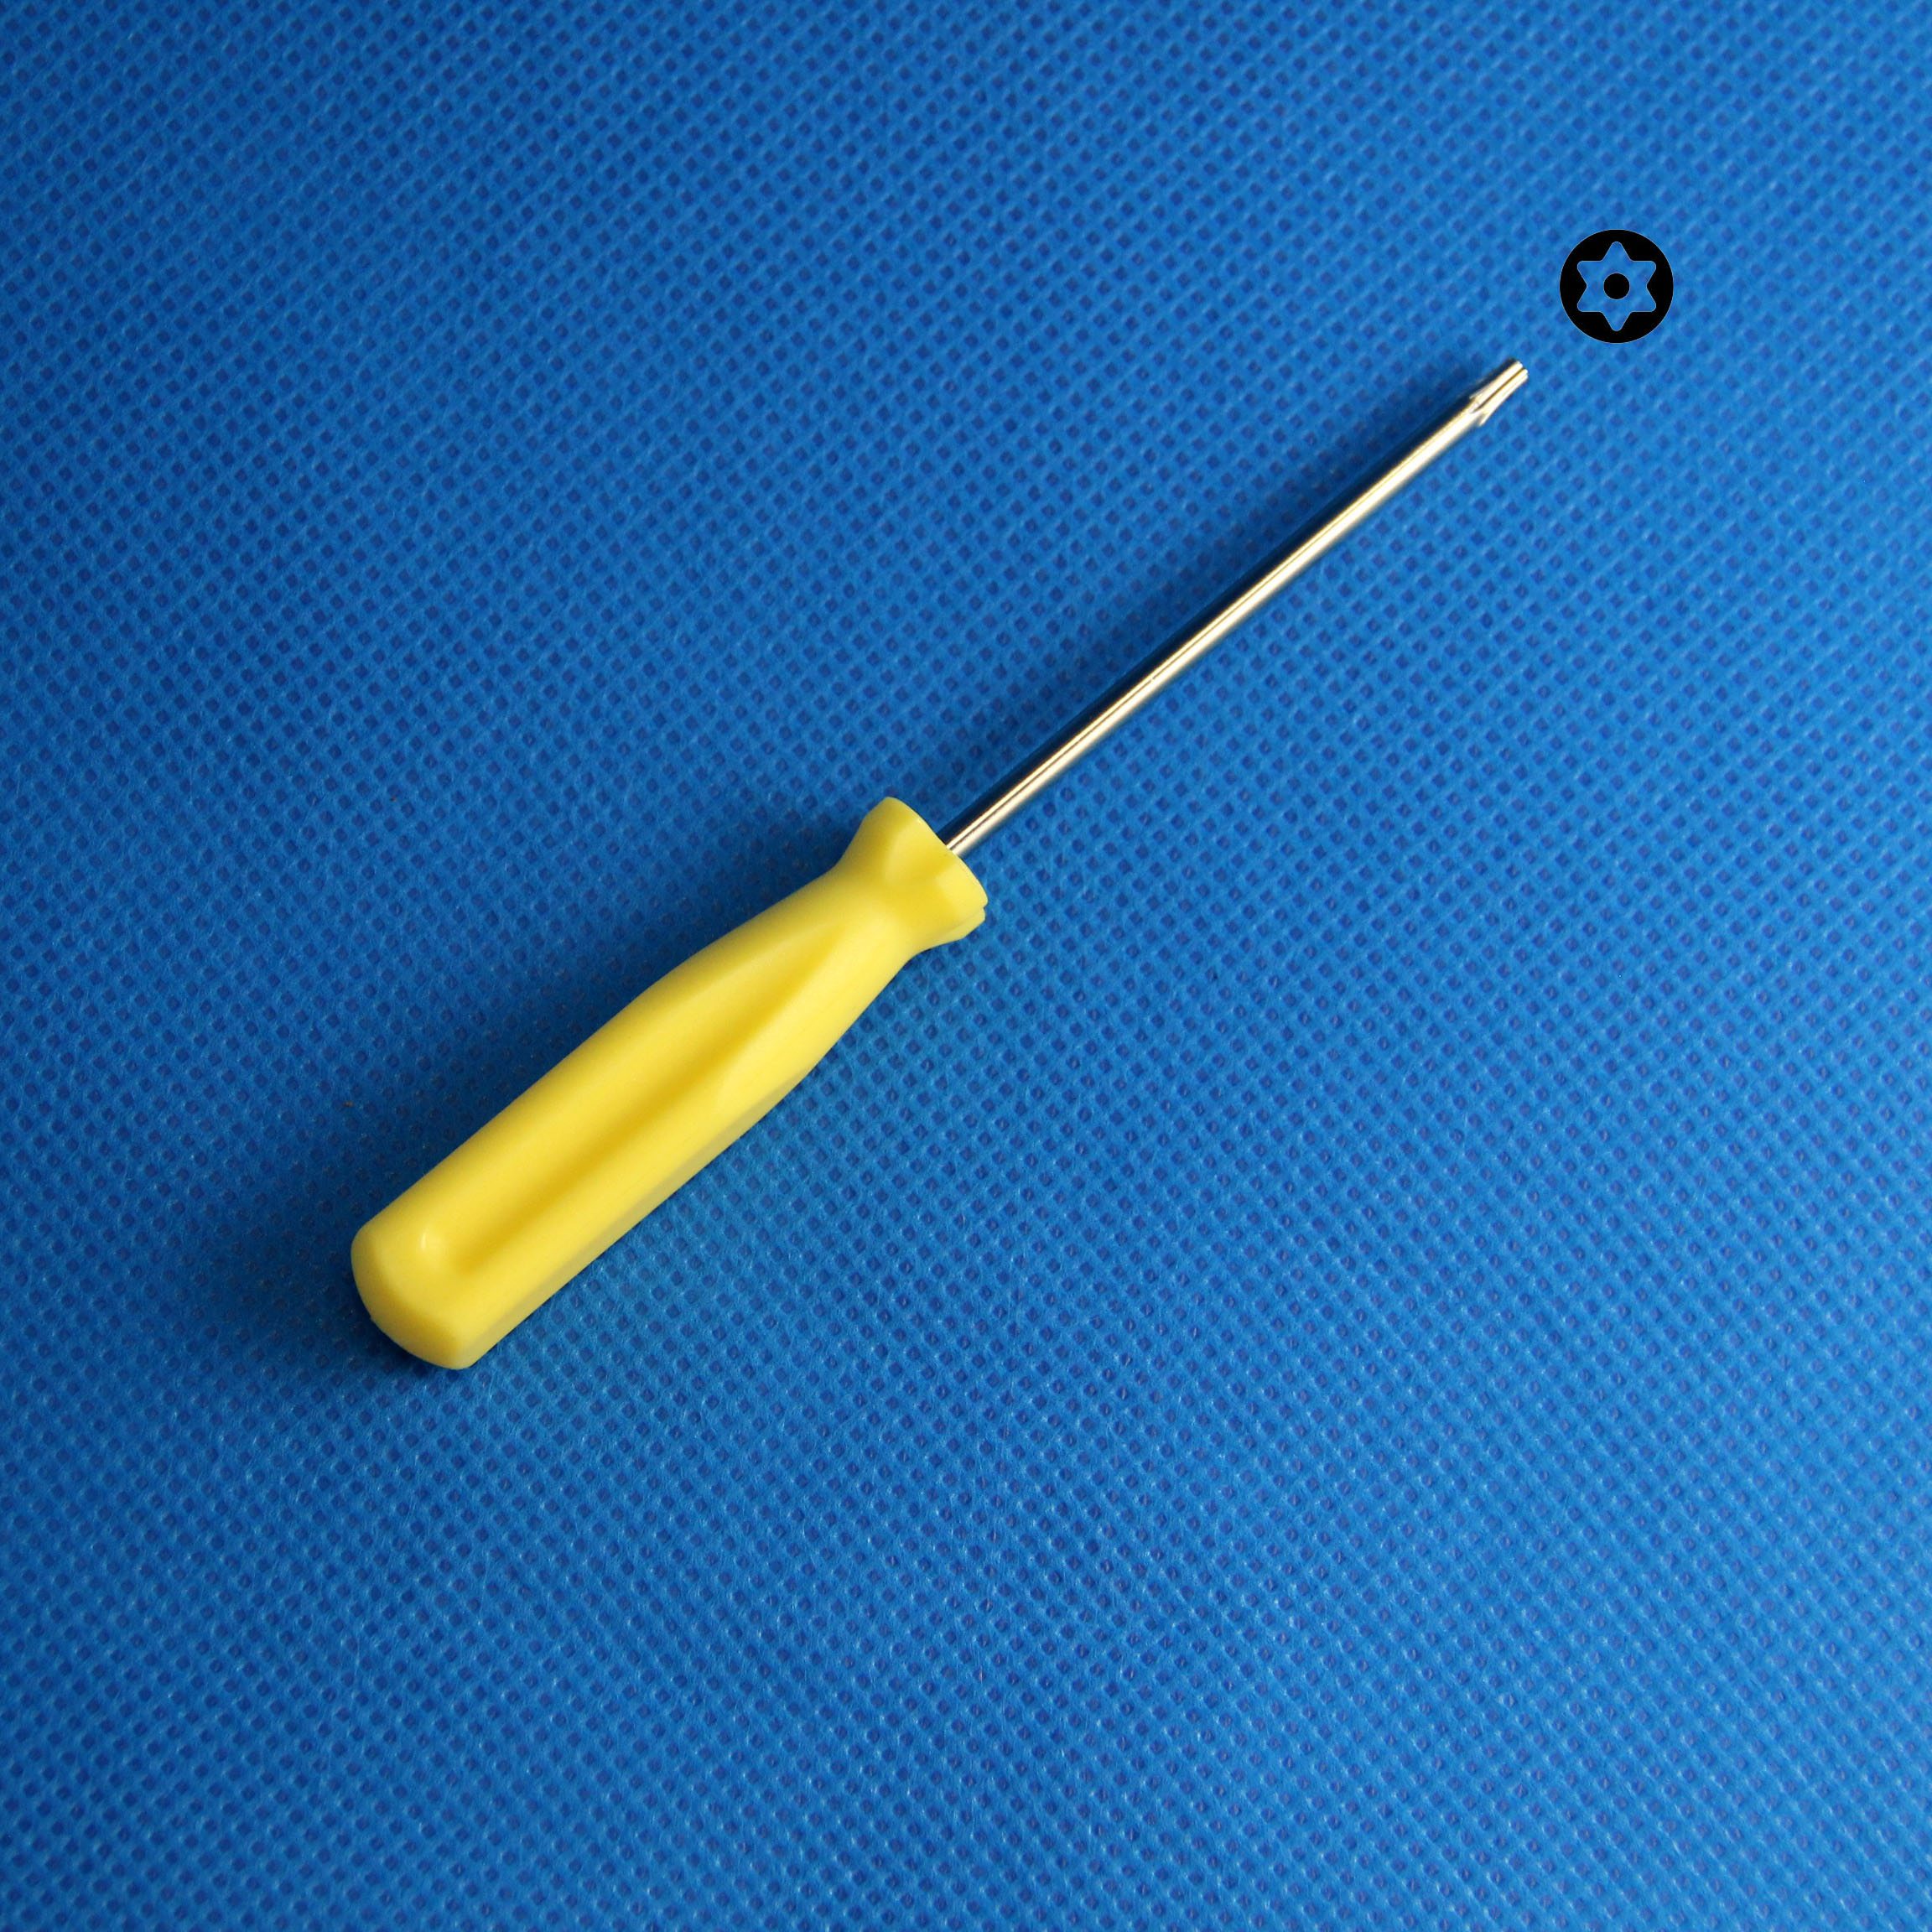 Torx T8 Screwdriver Tamper Proof With hold in the tip